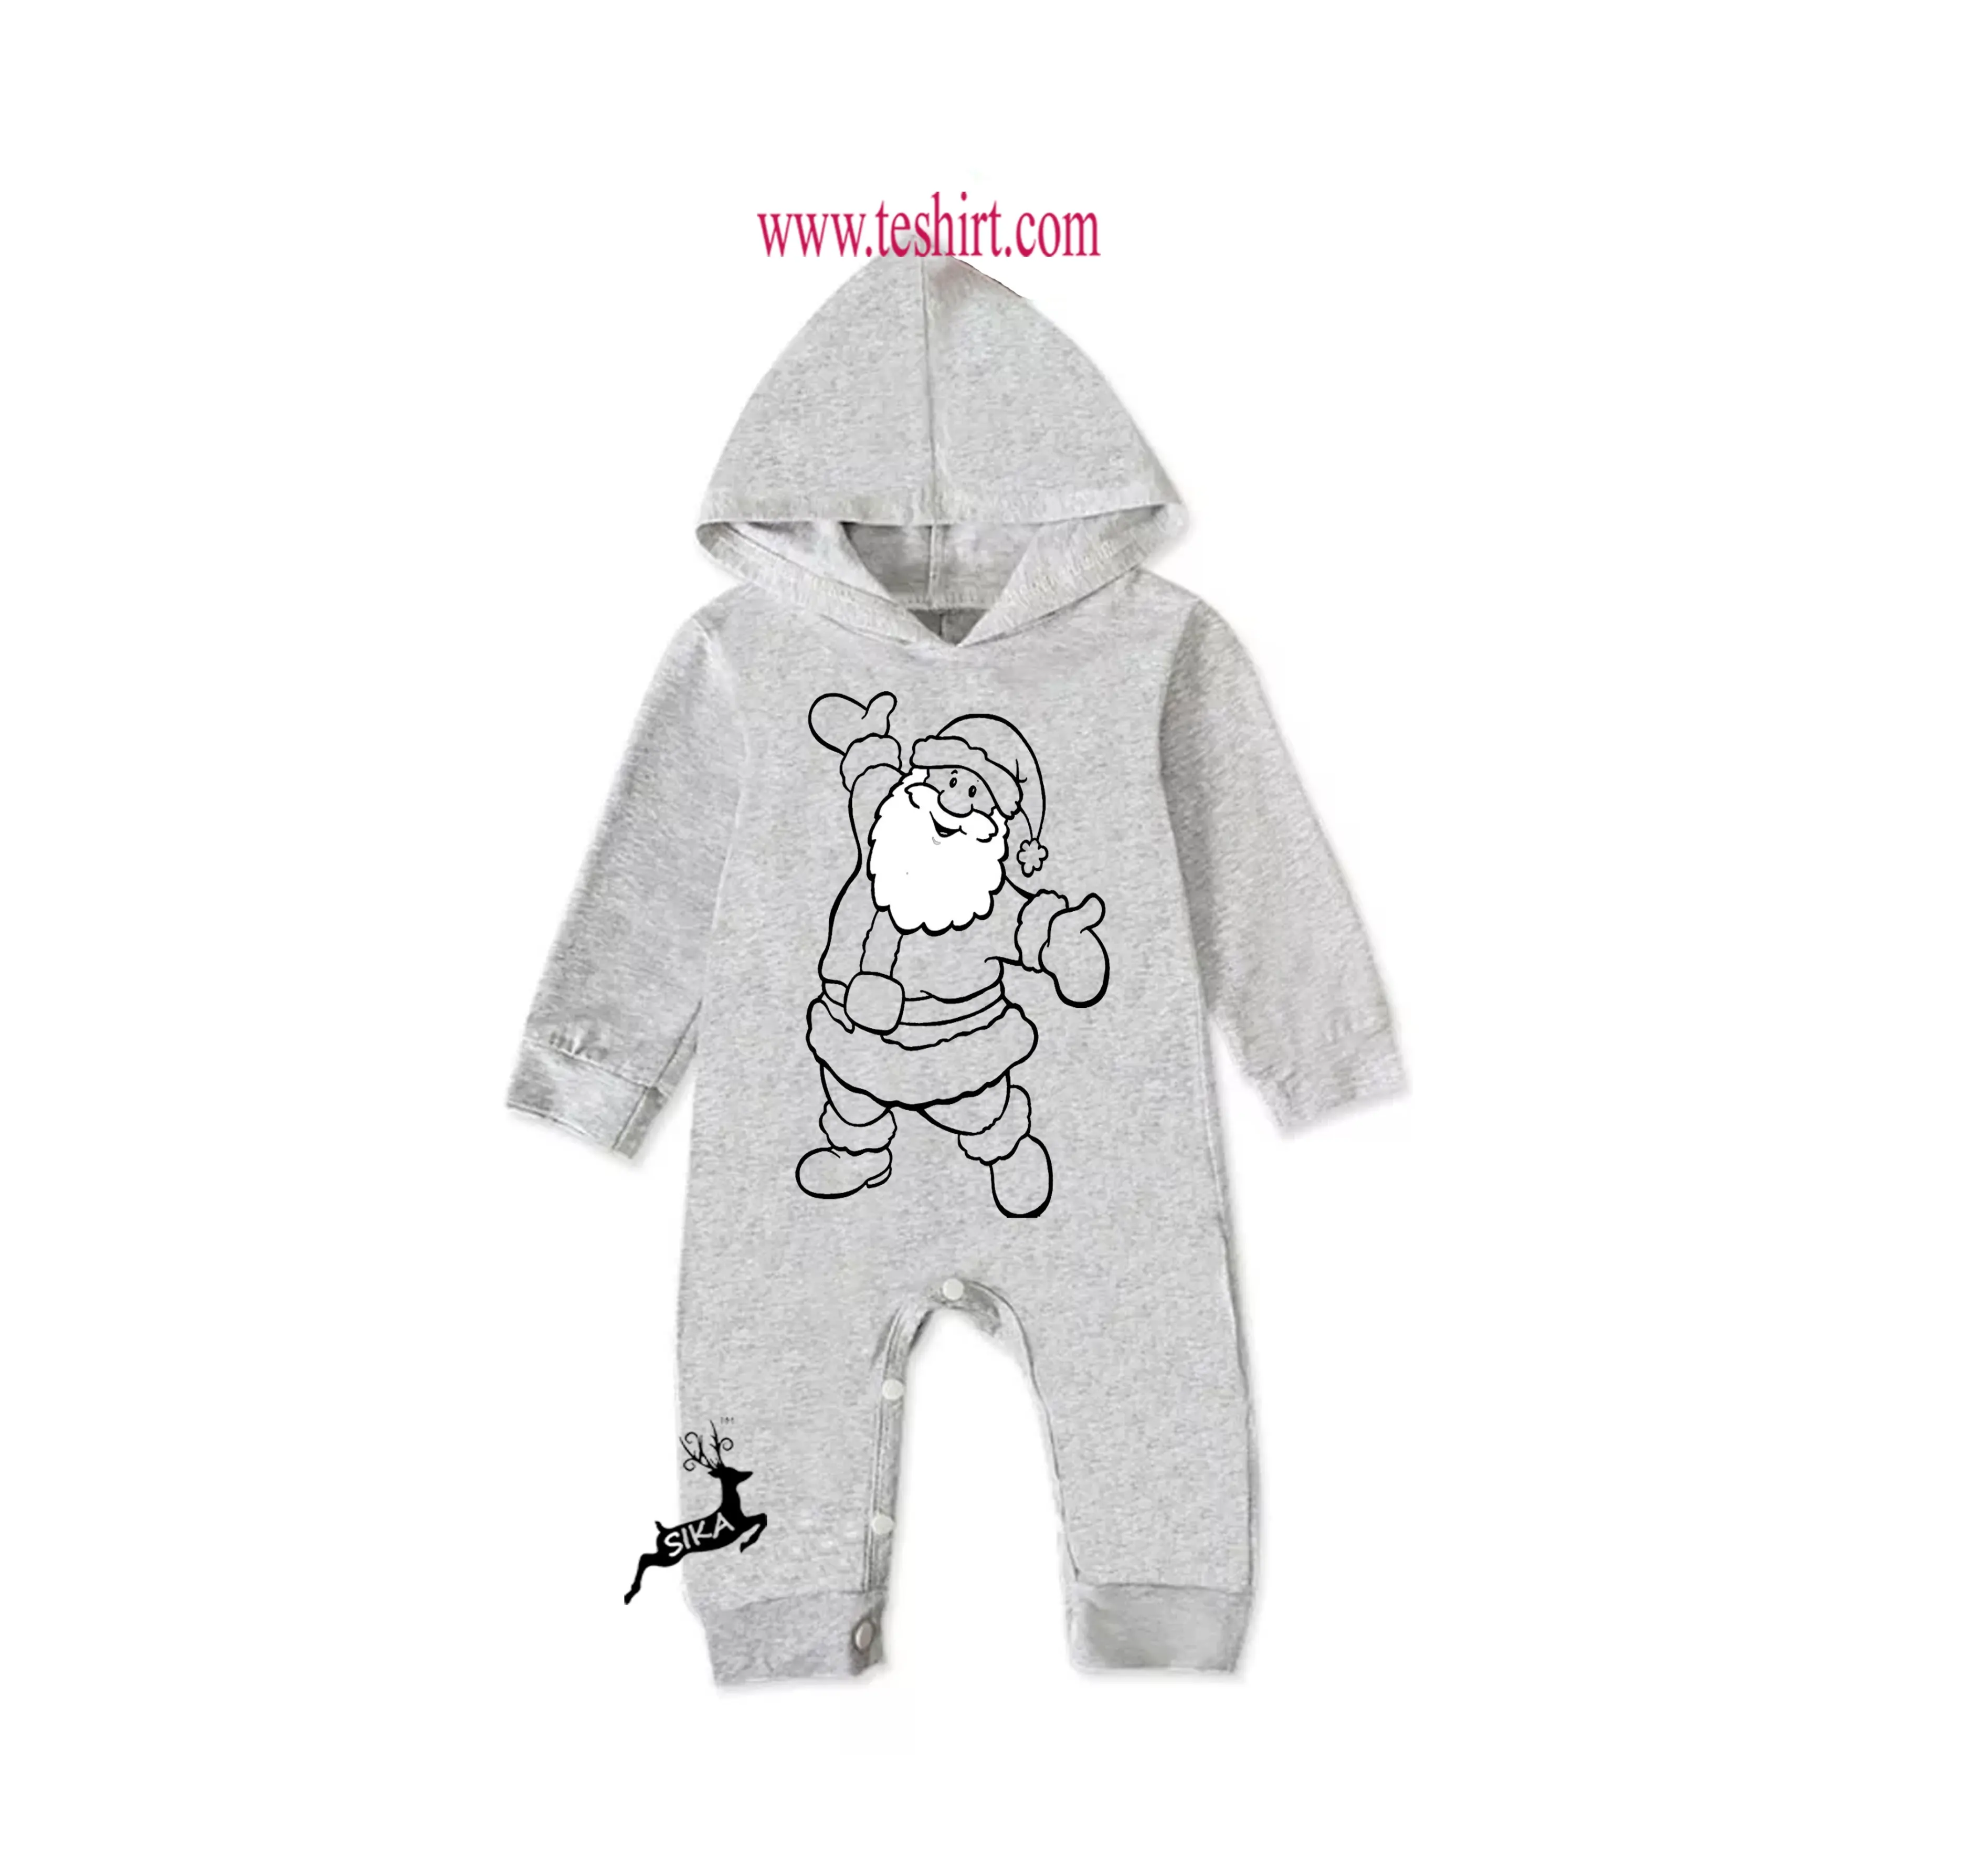 New Designs Fashion Cheap Wholesale Baby Clothes Romper bamboo Cotton Infant Baby Clothes Newborn Baby hooded winter new romper